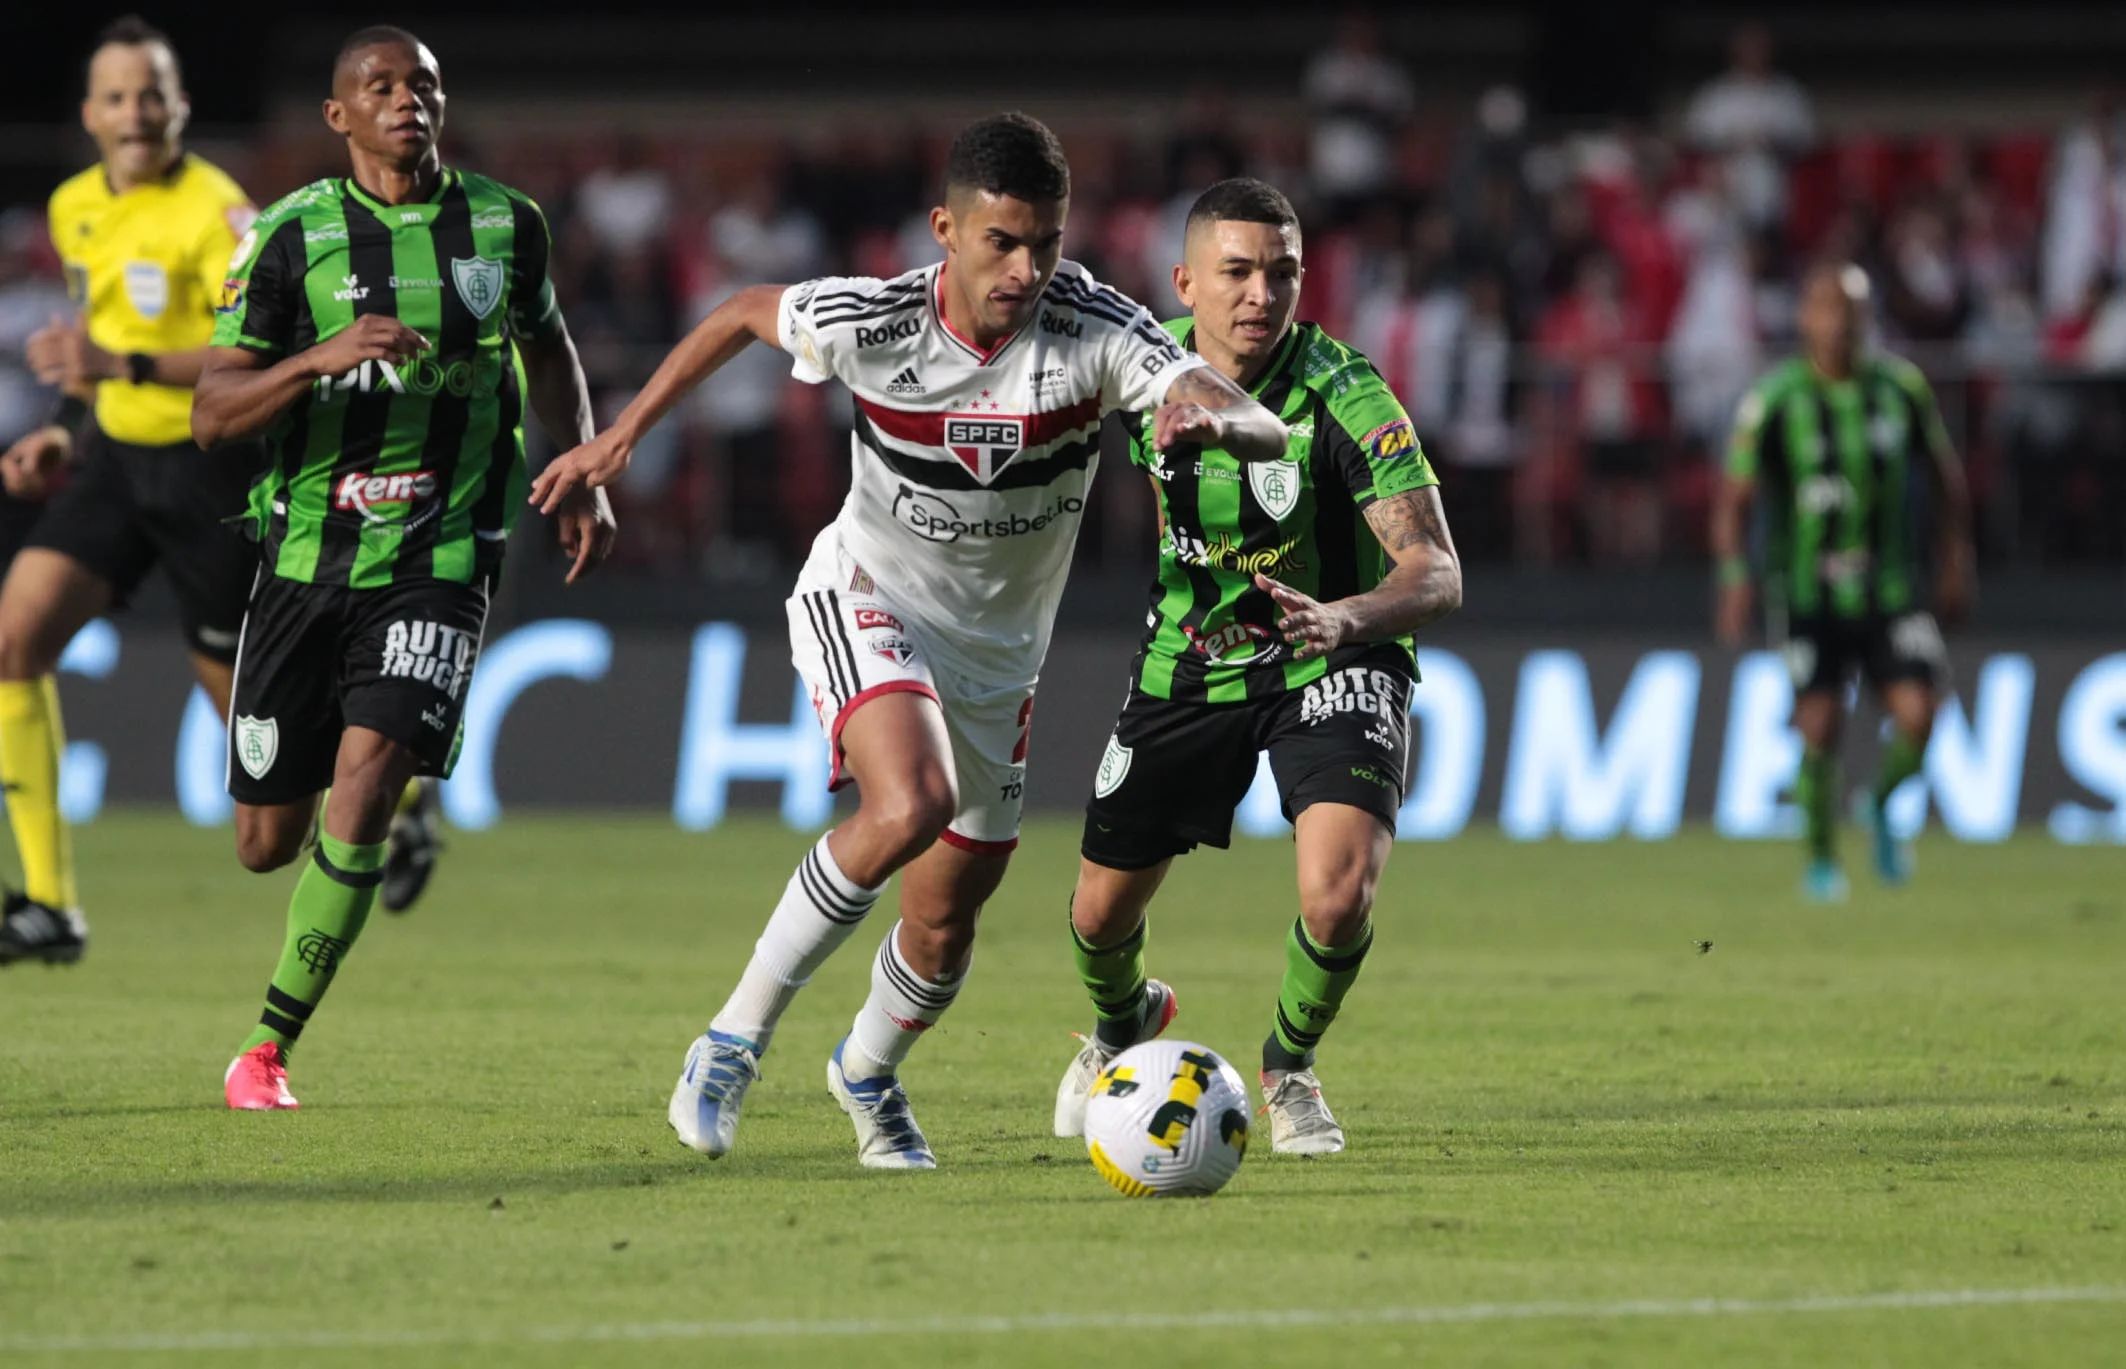 America MG: A Brief Overview of the Brazilian Football Club